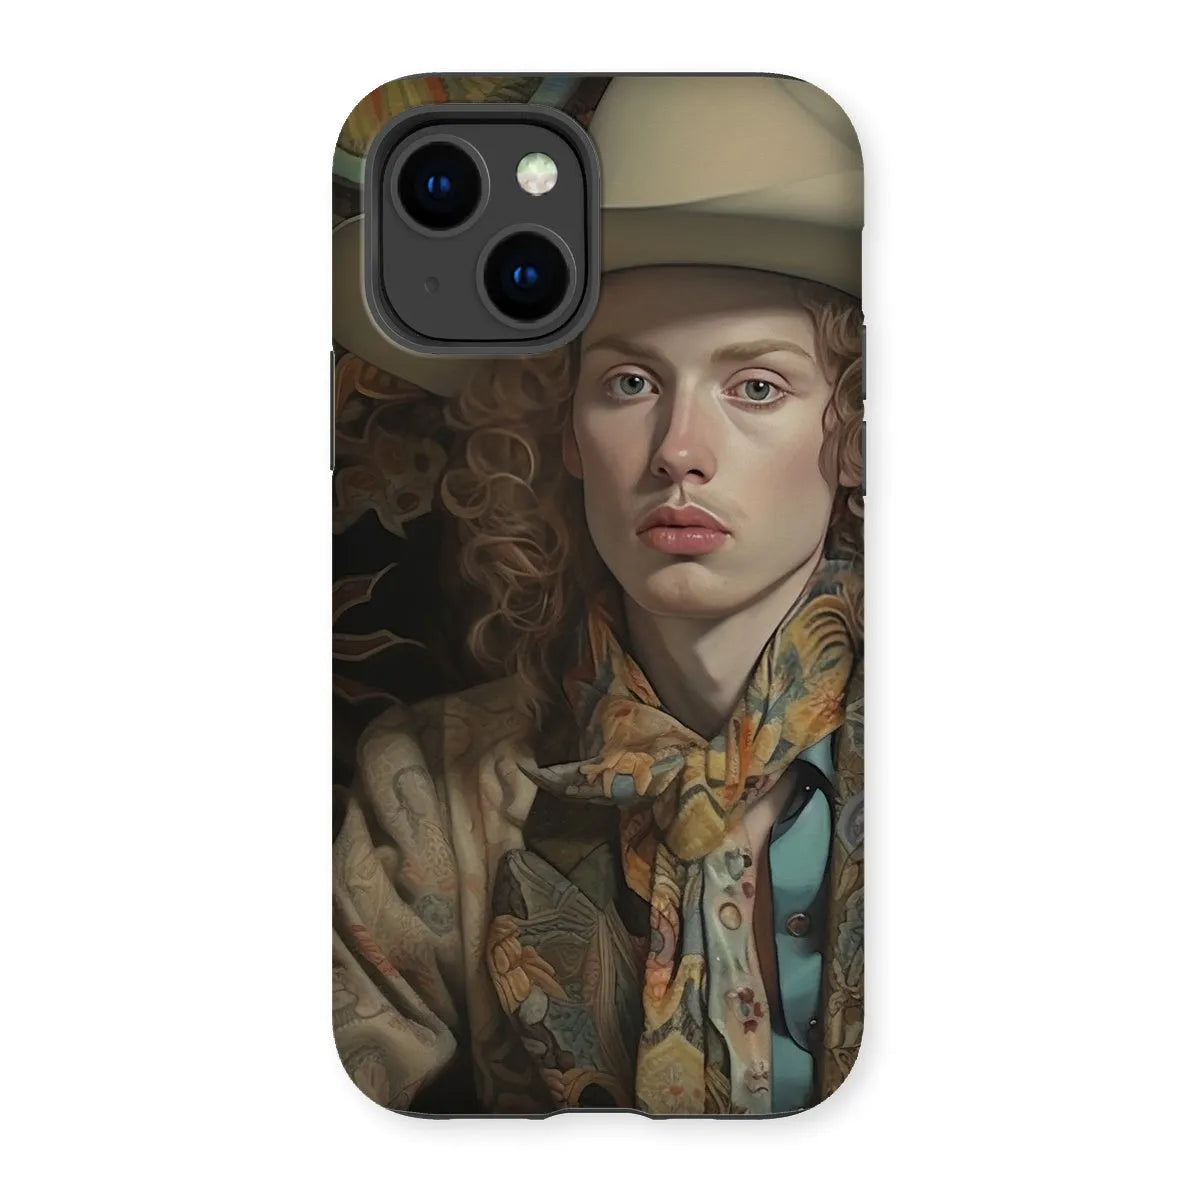 Ollie The Transgender Cowboy - F2m Dandy Outlaw Phone Case - Iphone 14 / Matte - Mobile Phone Cases - Aesthetic Art